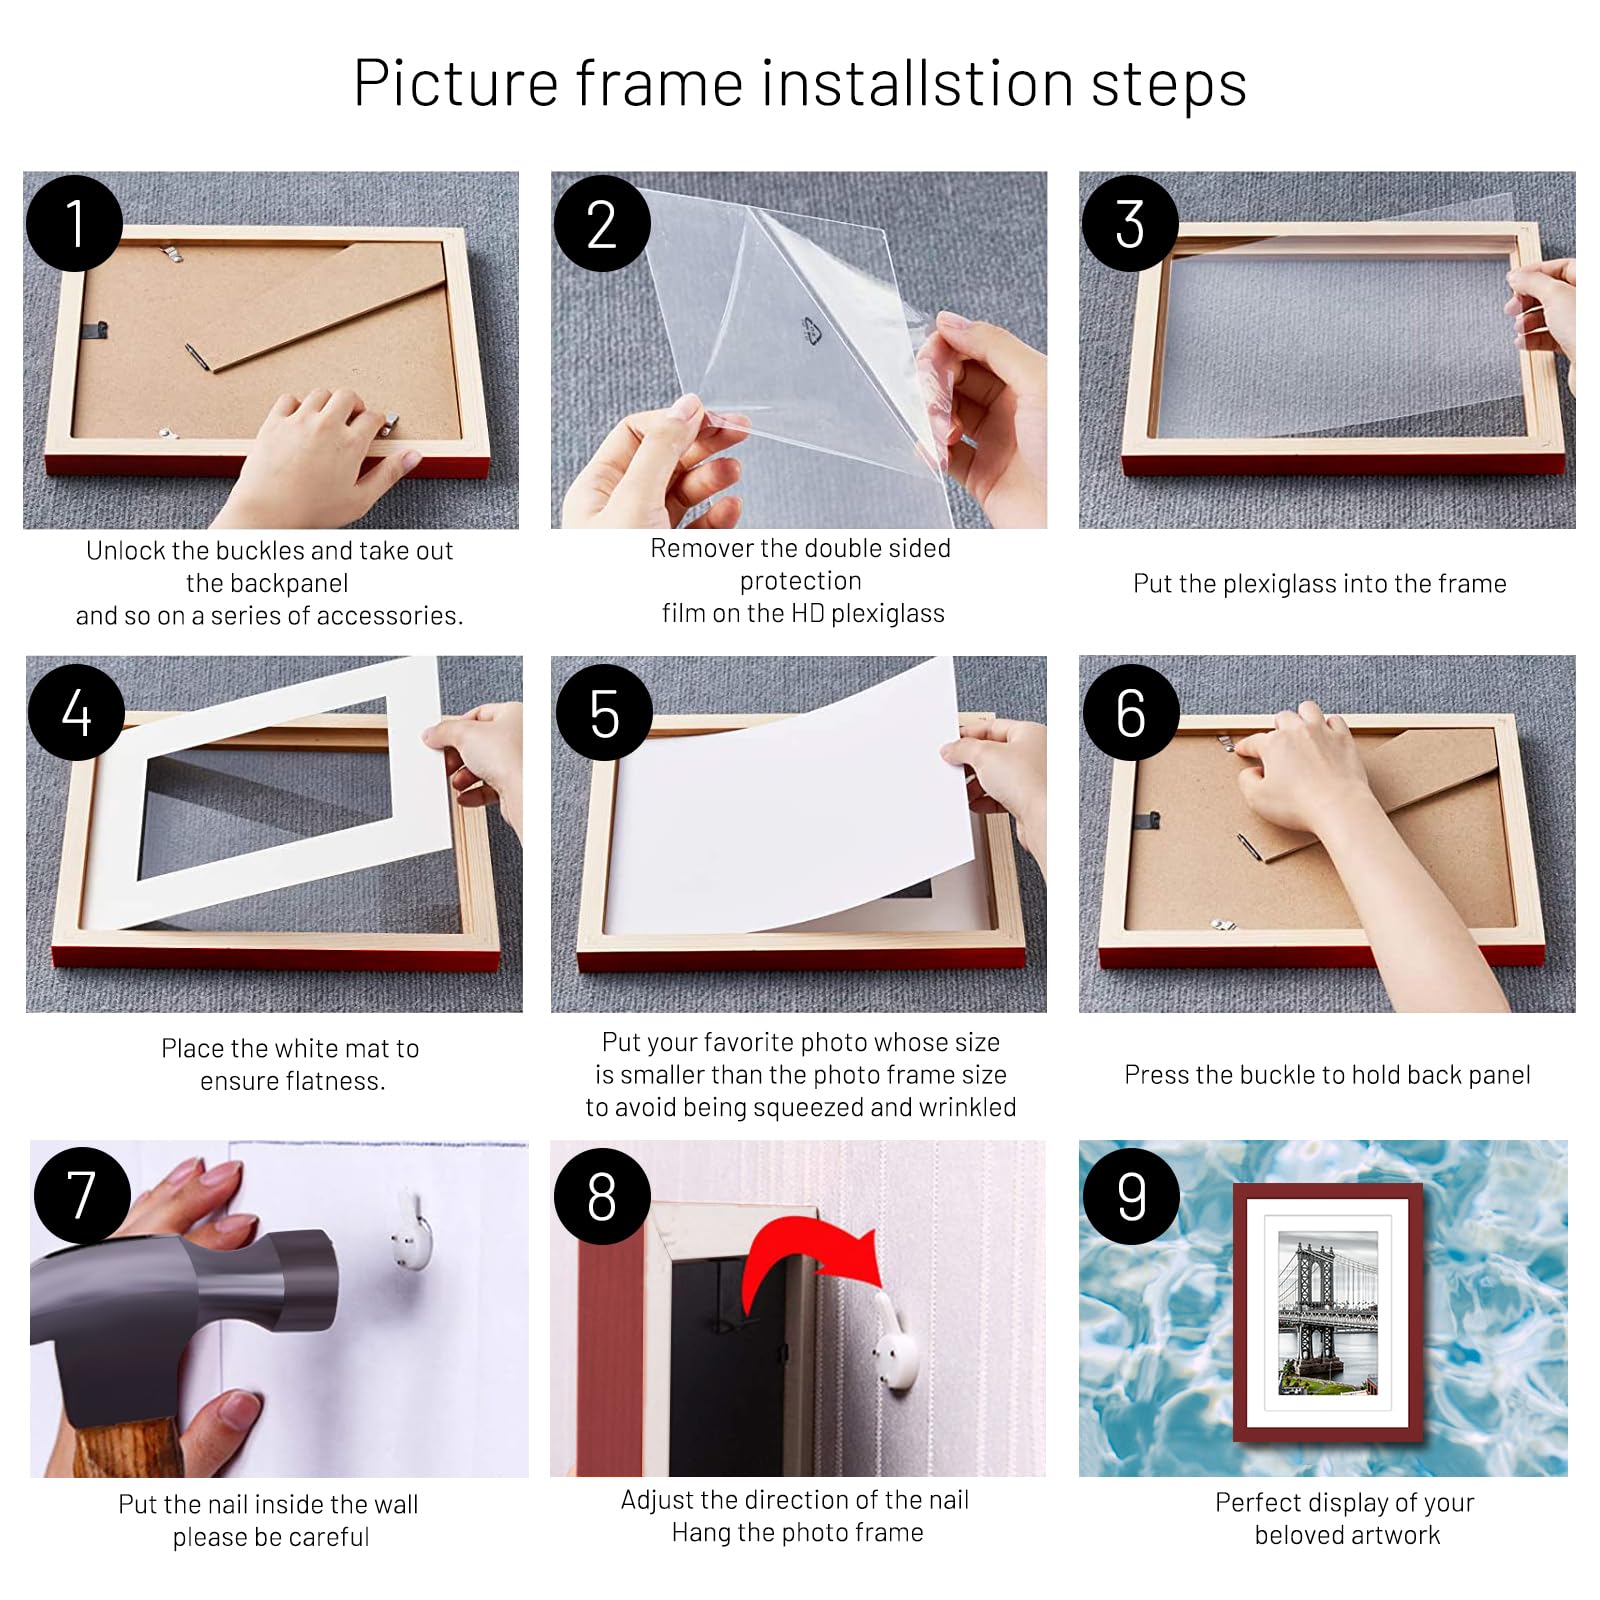 UHFWIFR 9x12 Picture Frames Solid Wood Display Pictures 6x8 or 5x7 with Mat or 9x12 Frame without Mat Poster Photo Frame Art with 2 Mats for Wall Mounting or Table Top(Red)